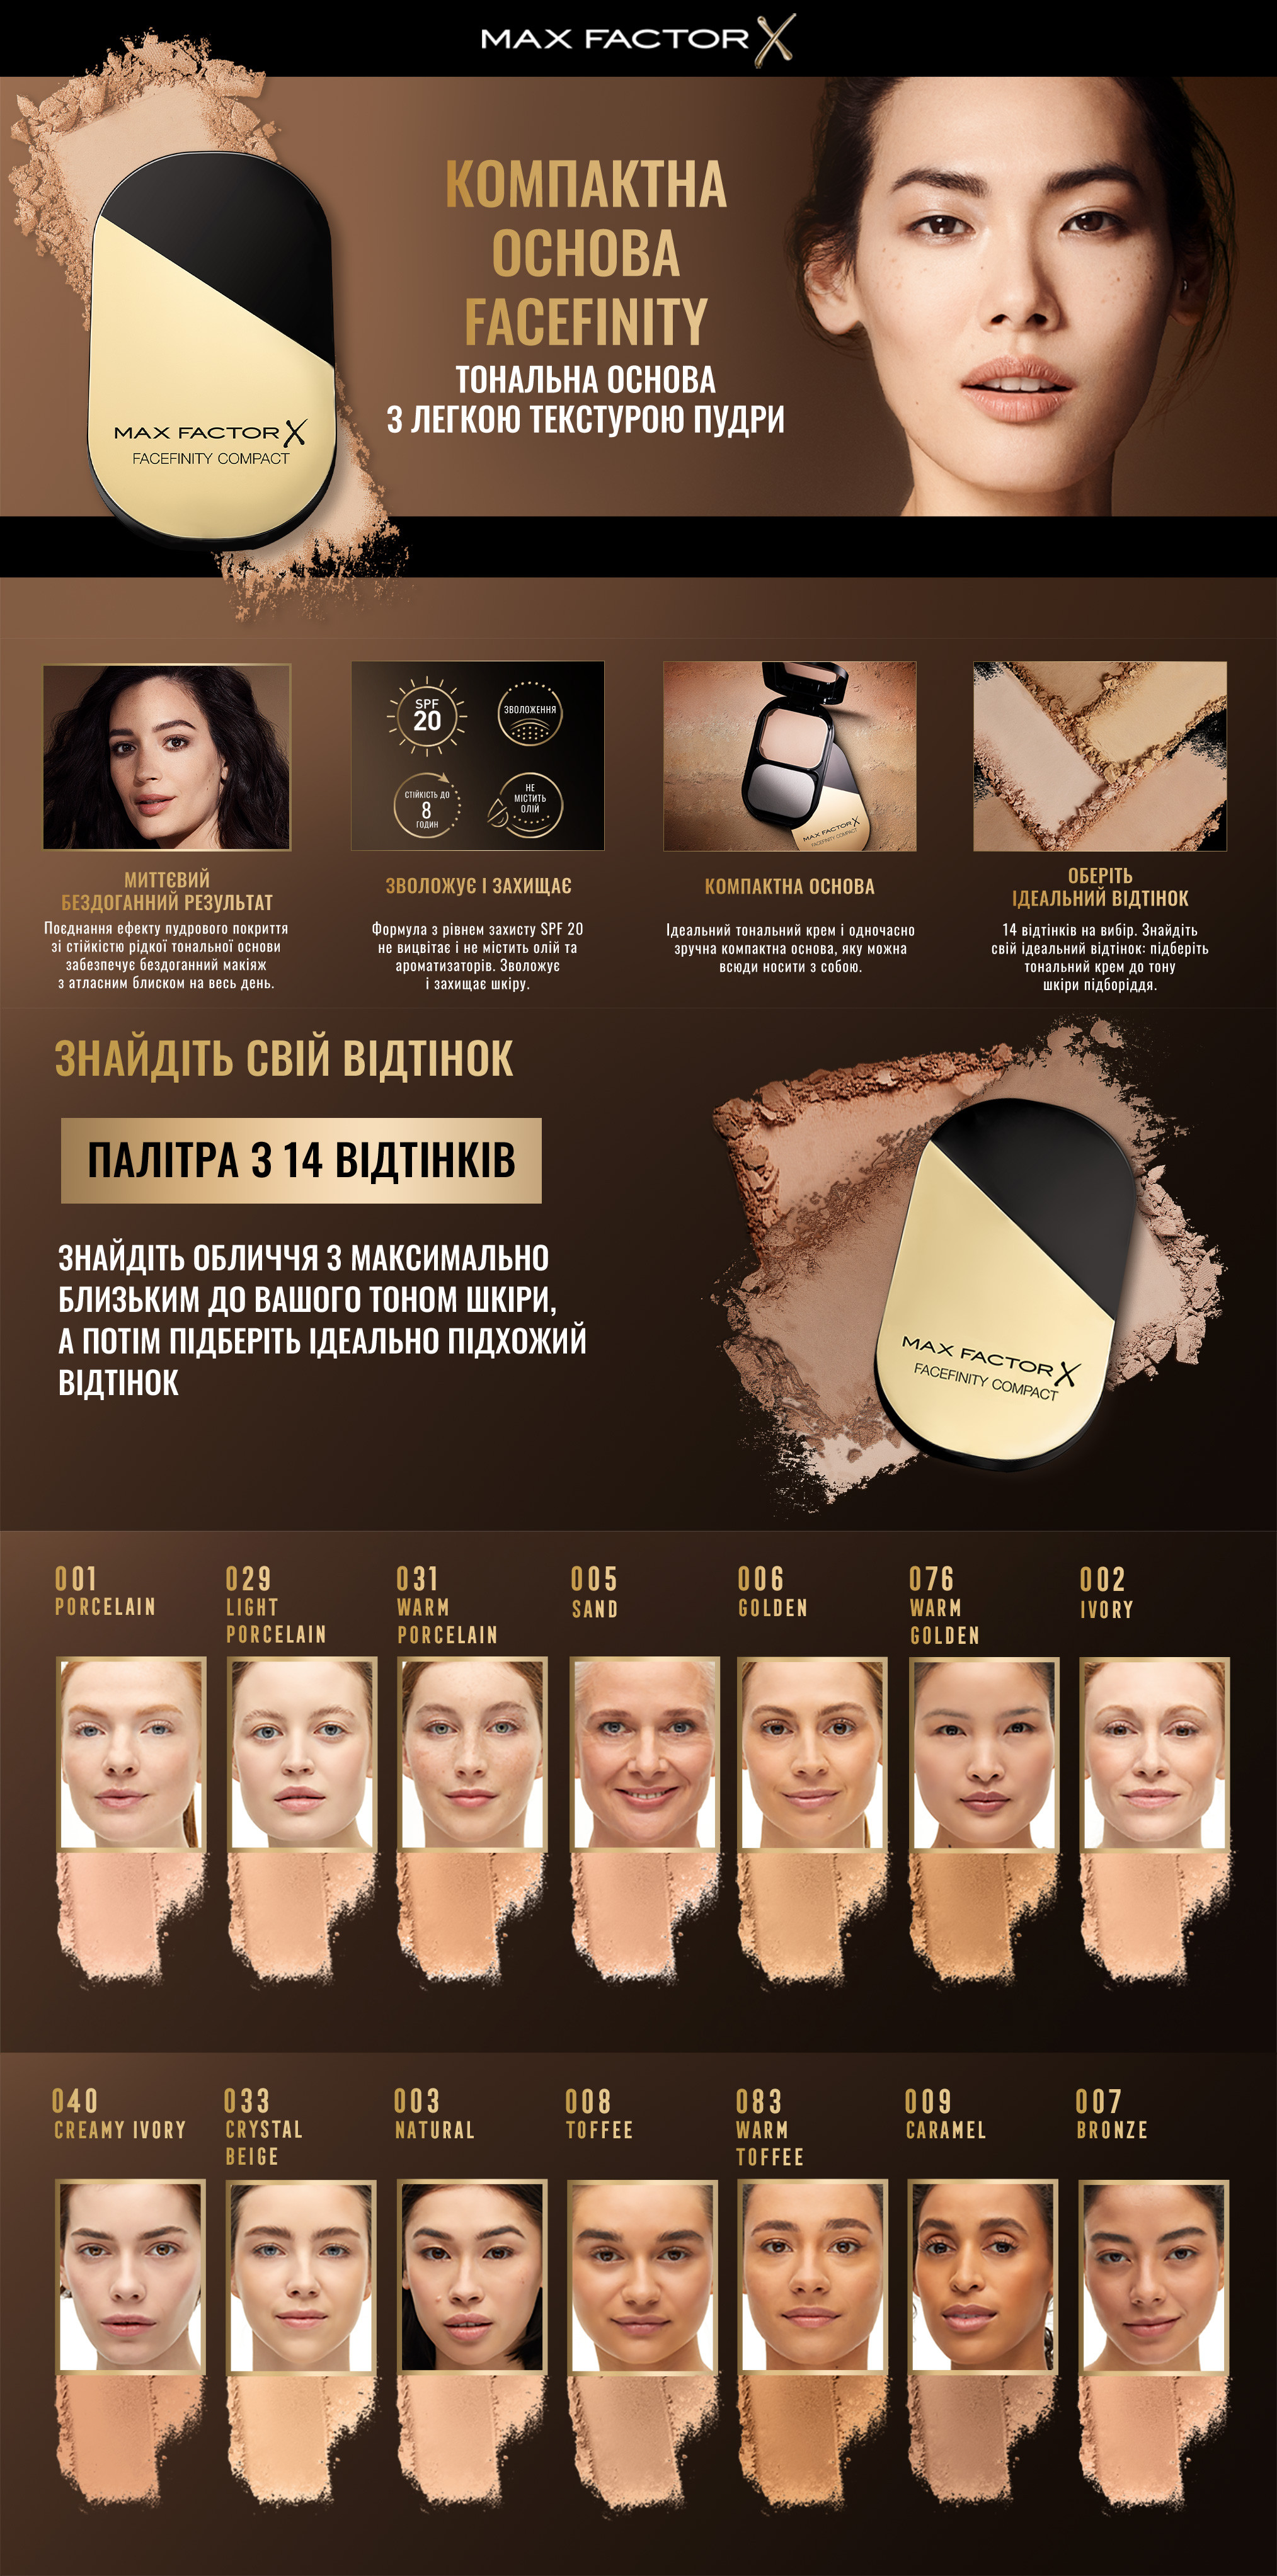 Max Factor Facefinity Compact Foundation SPF 20